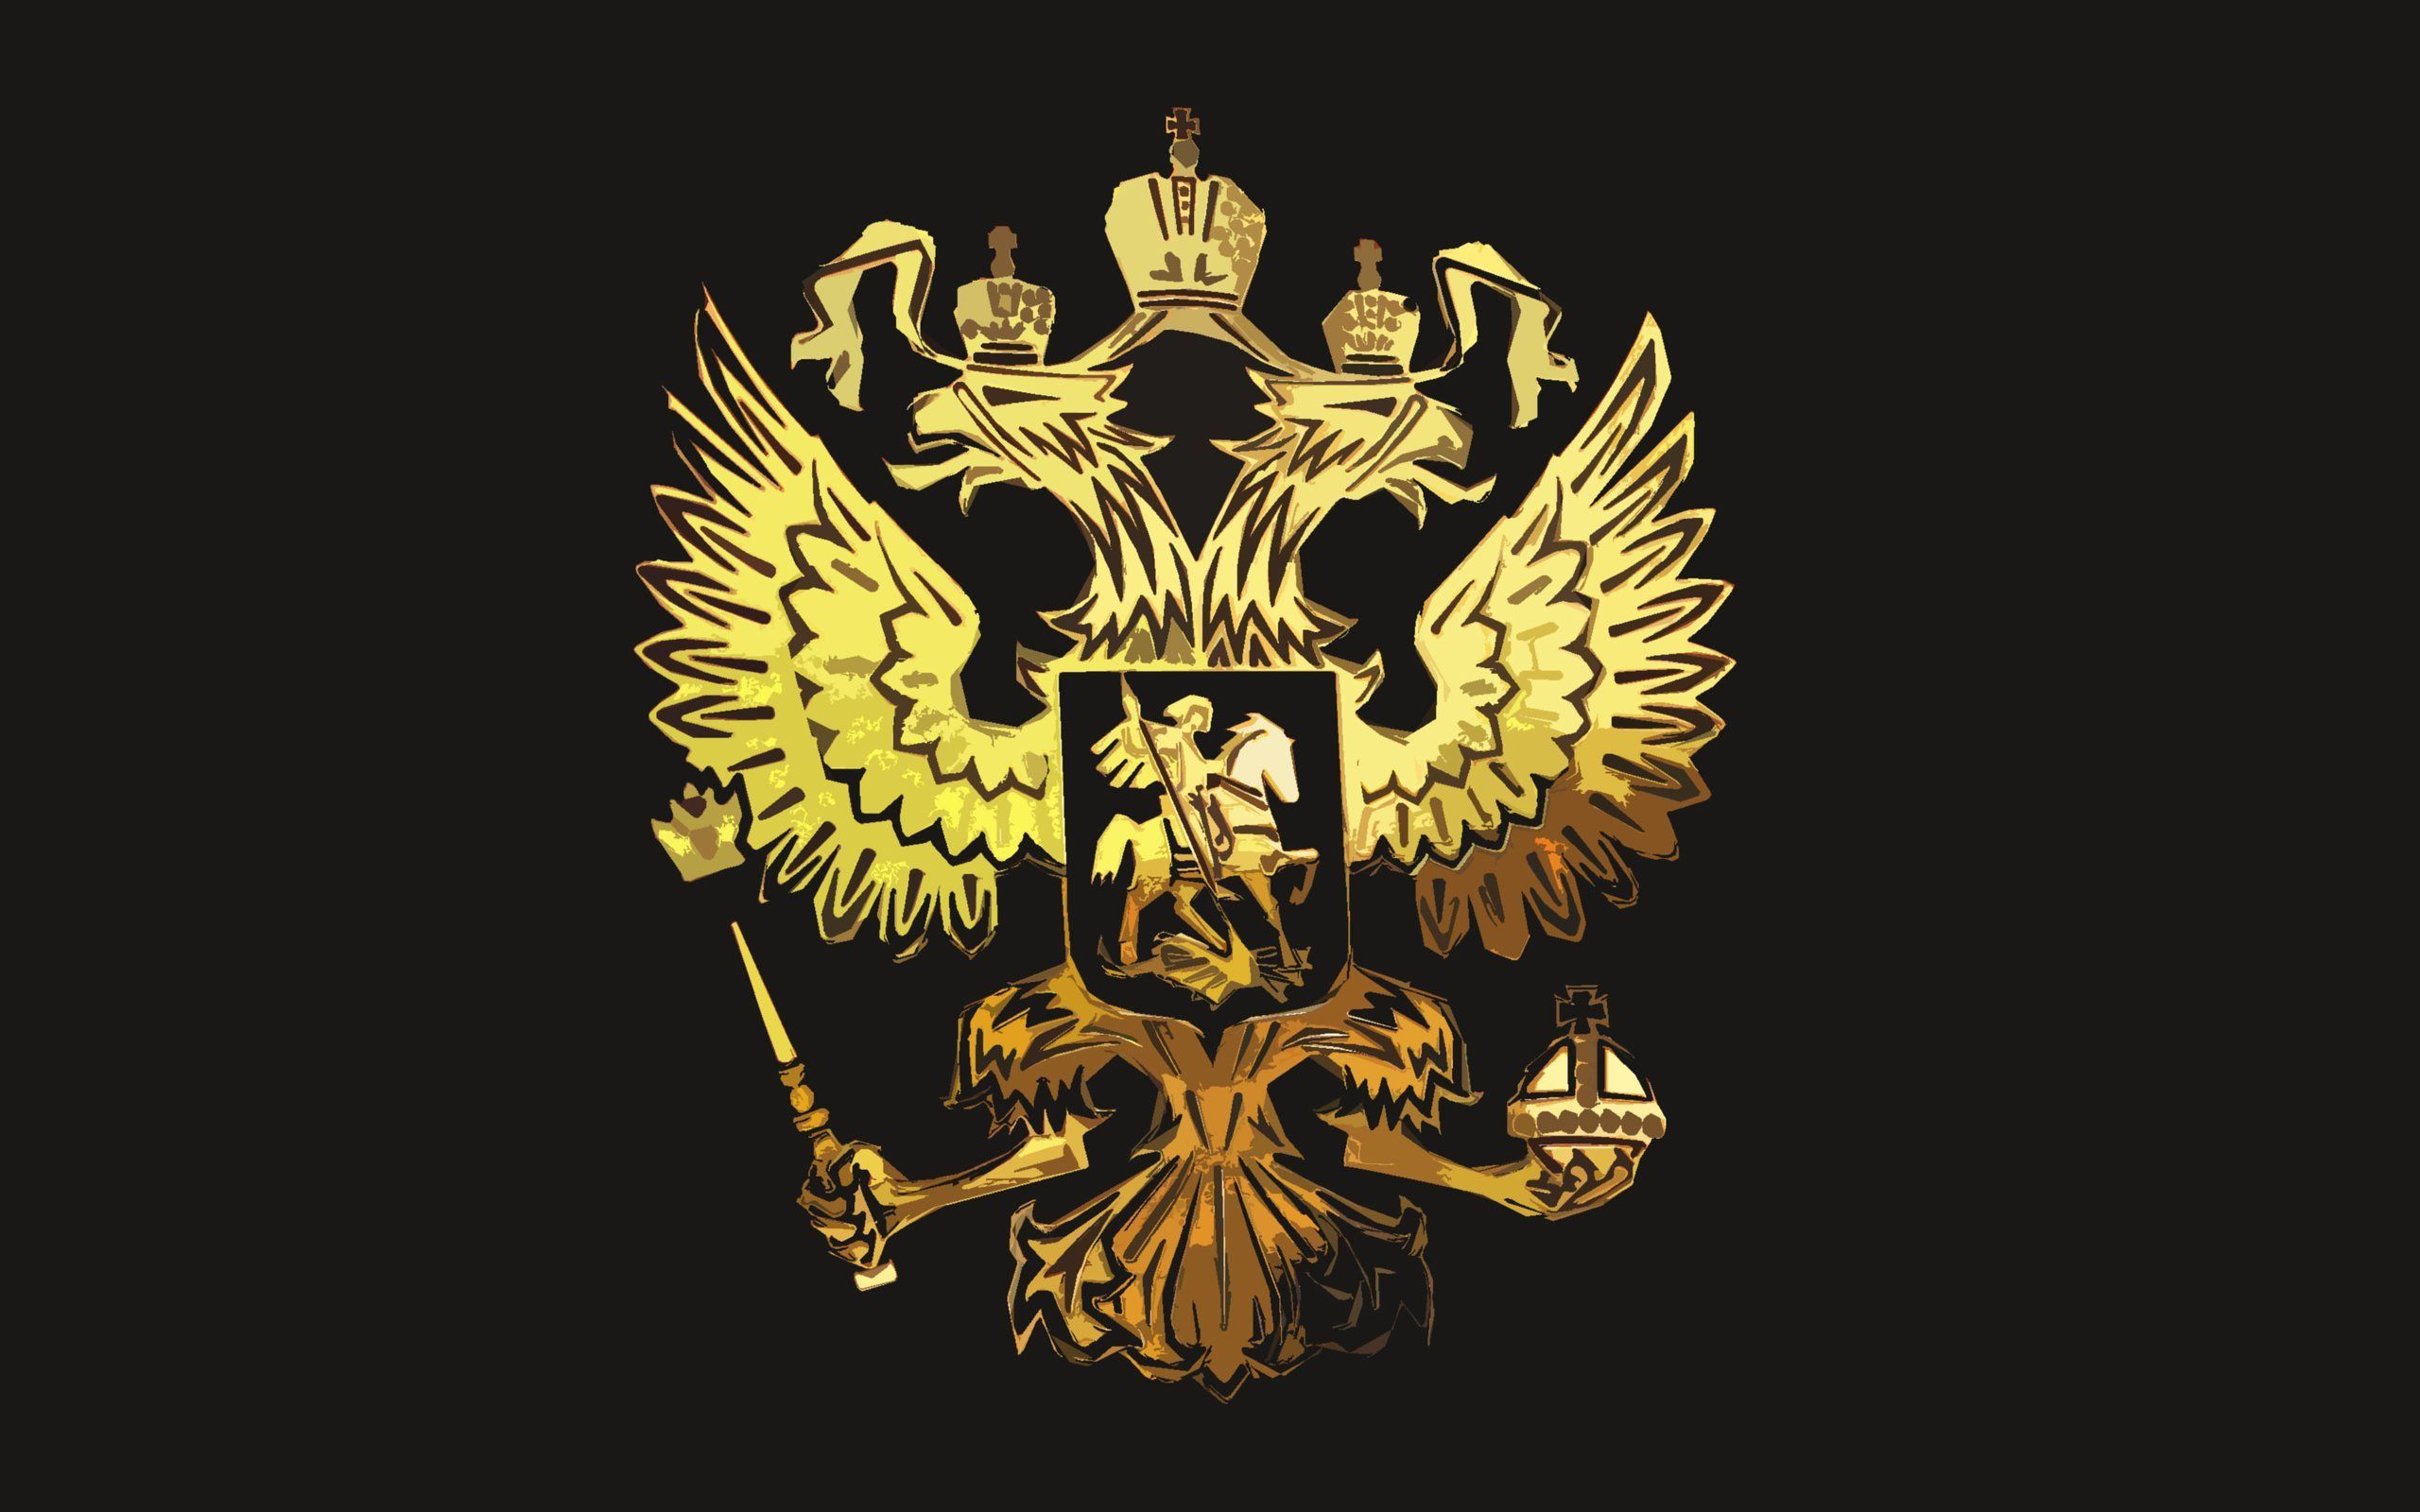 Download Wallpaper Heraldic Shield, Russia, Grunge, Coat Of Arms, Russian Federation, The Coat Of Arms Of Russia, Gold, Double Headed Eagle For Desktop With Resolution 2560x1600. High Quality HD Picture Wallpaper